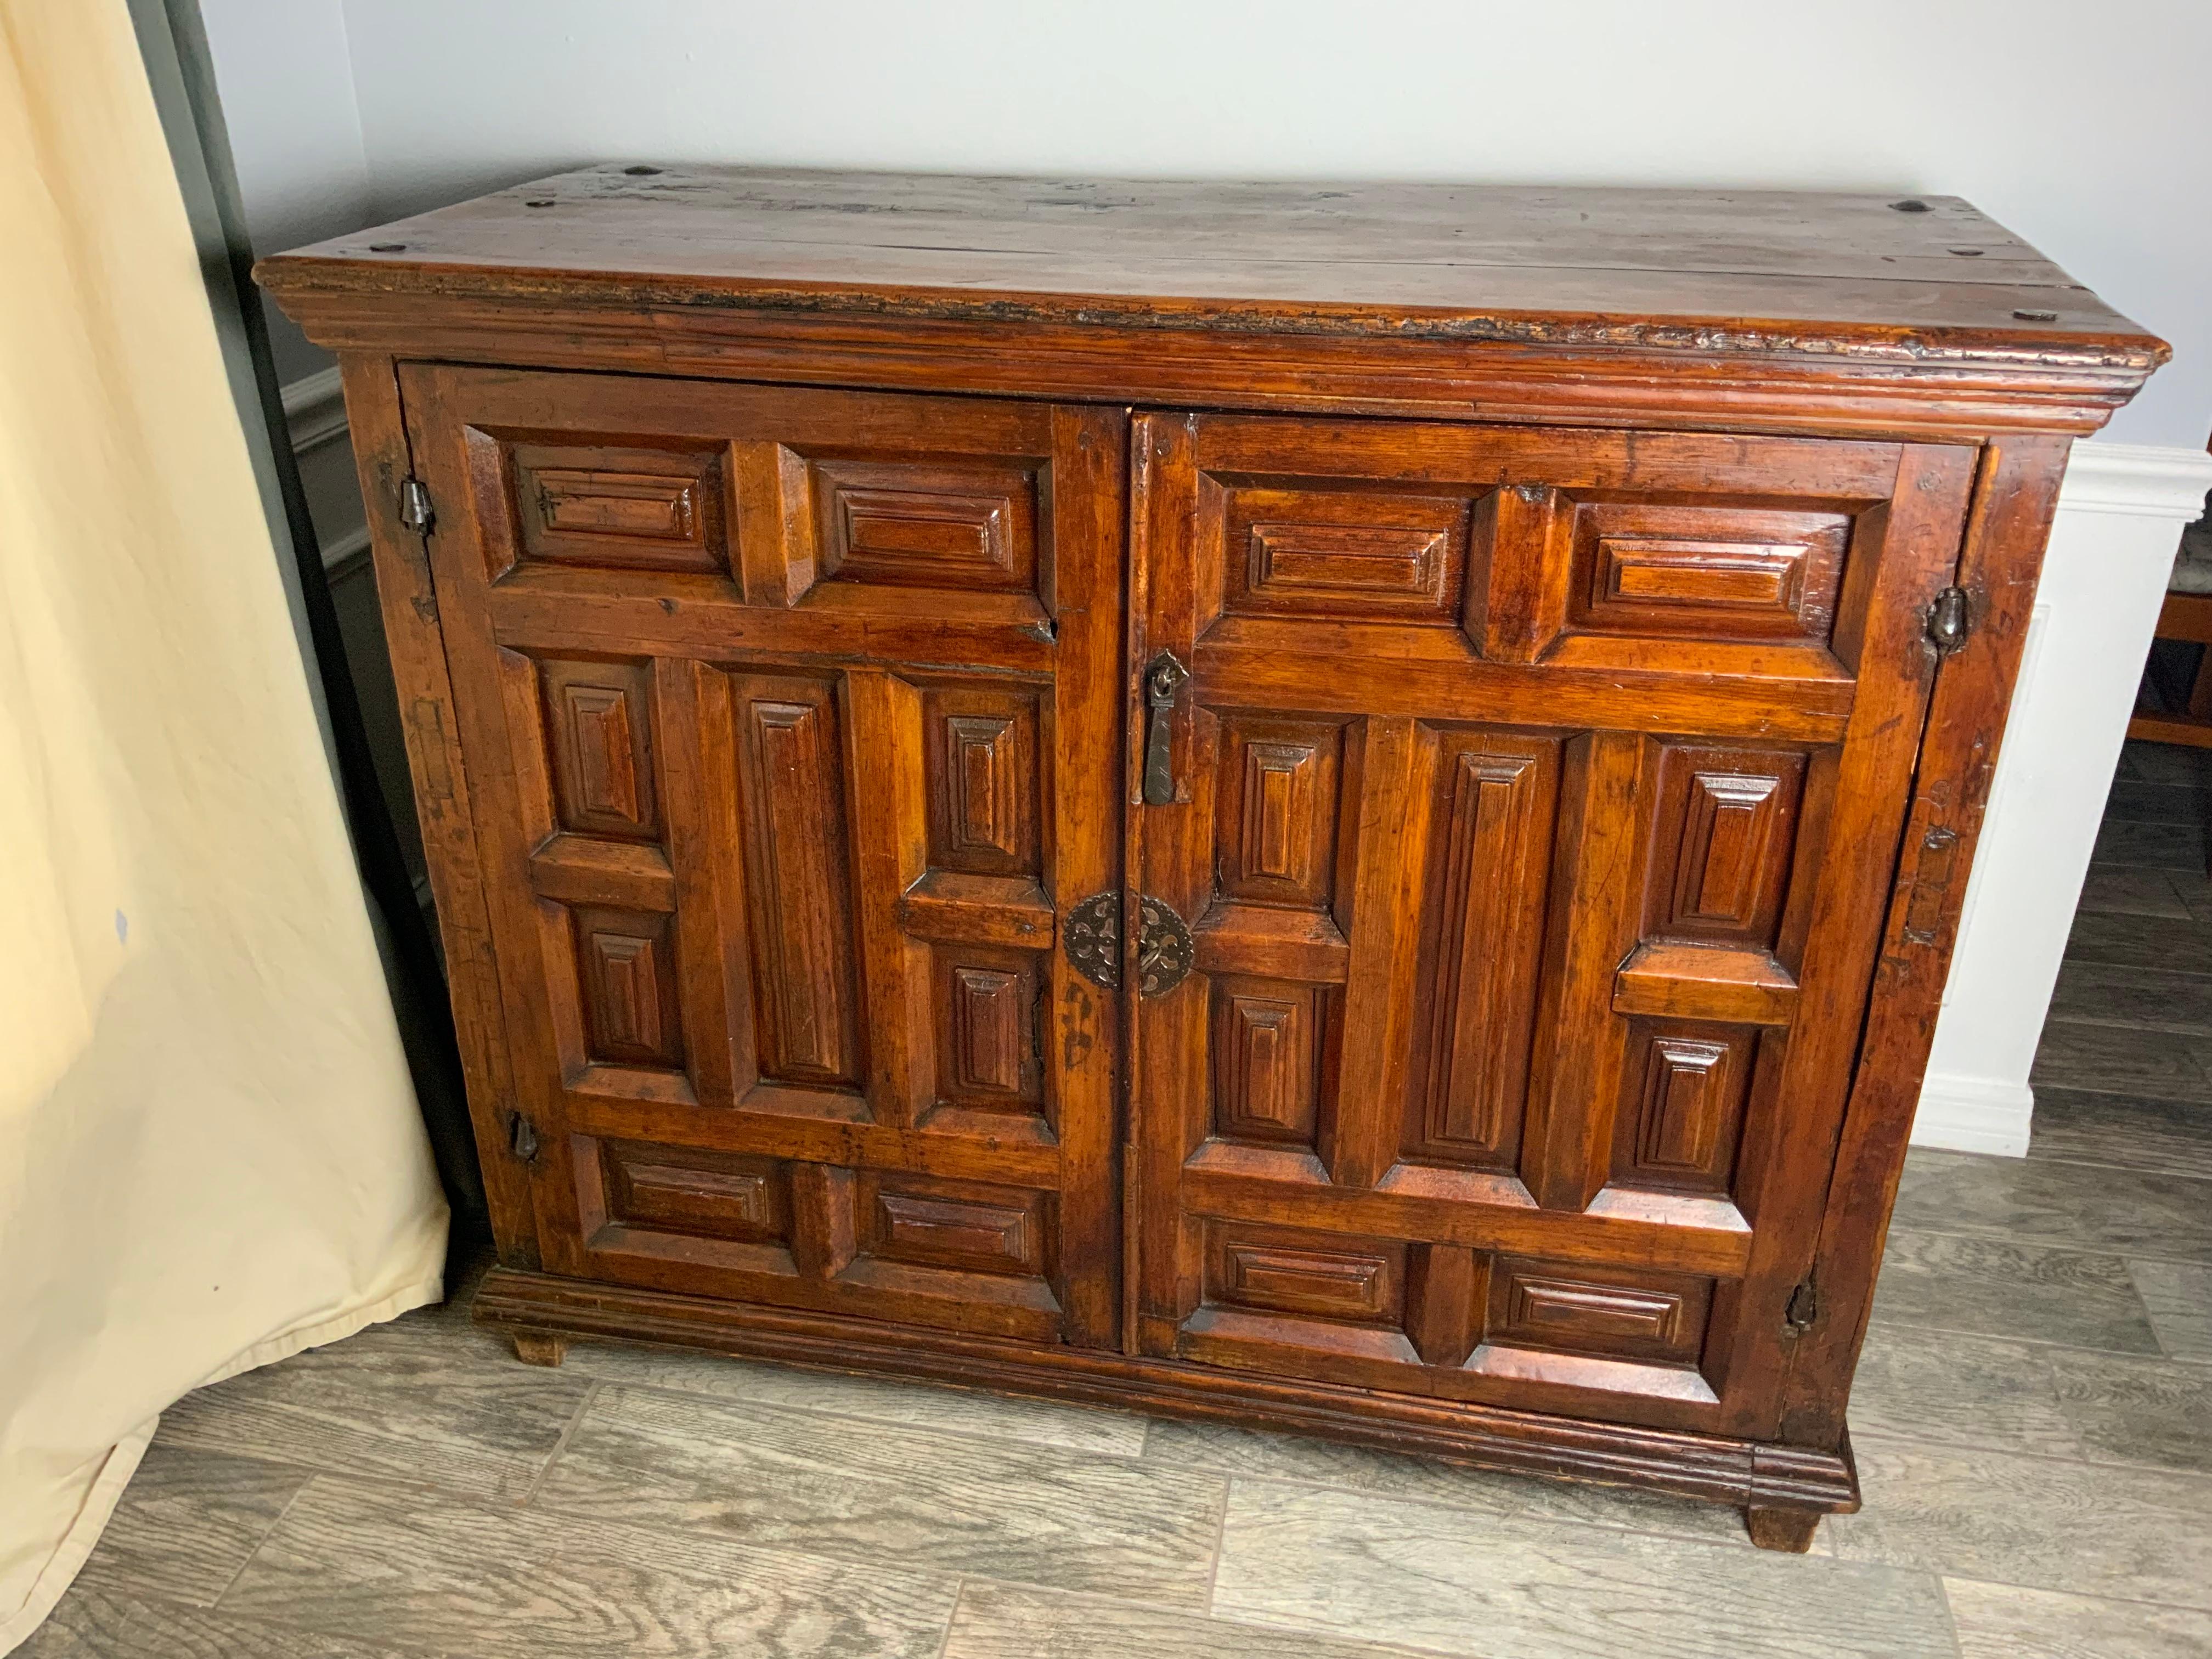 18th Century Spanish Colonial Paneled Cabinet In Good Condition For Sale In Bradenton, FL